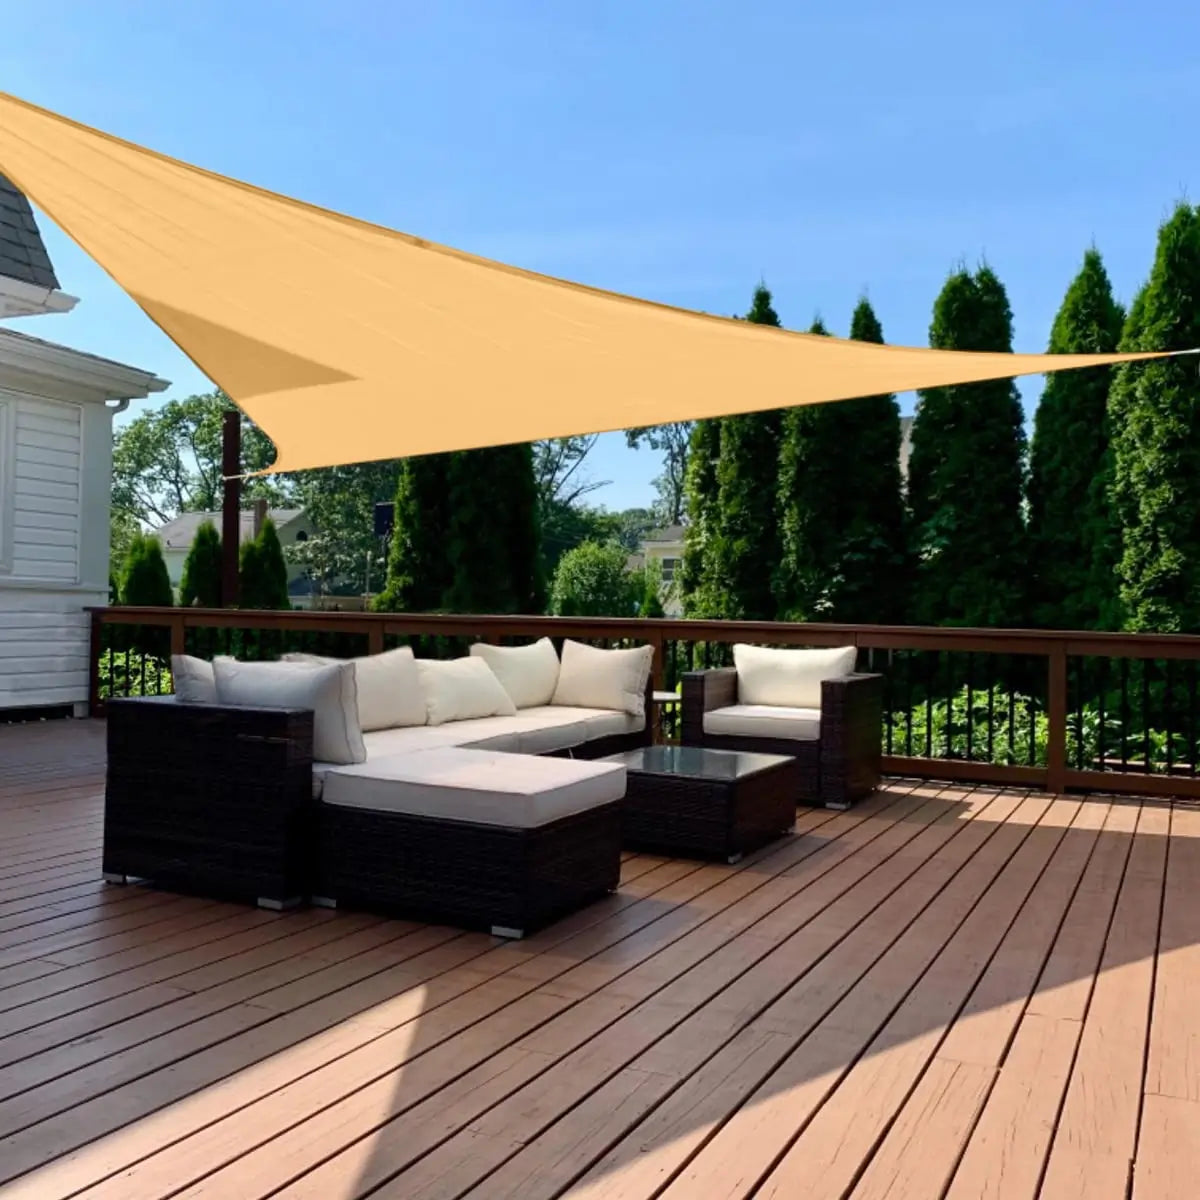 Sand Triangle Shade Sail for patio